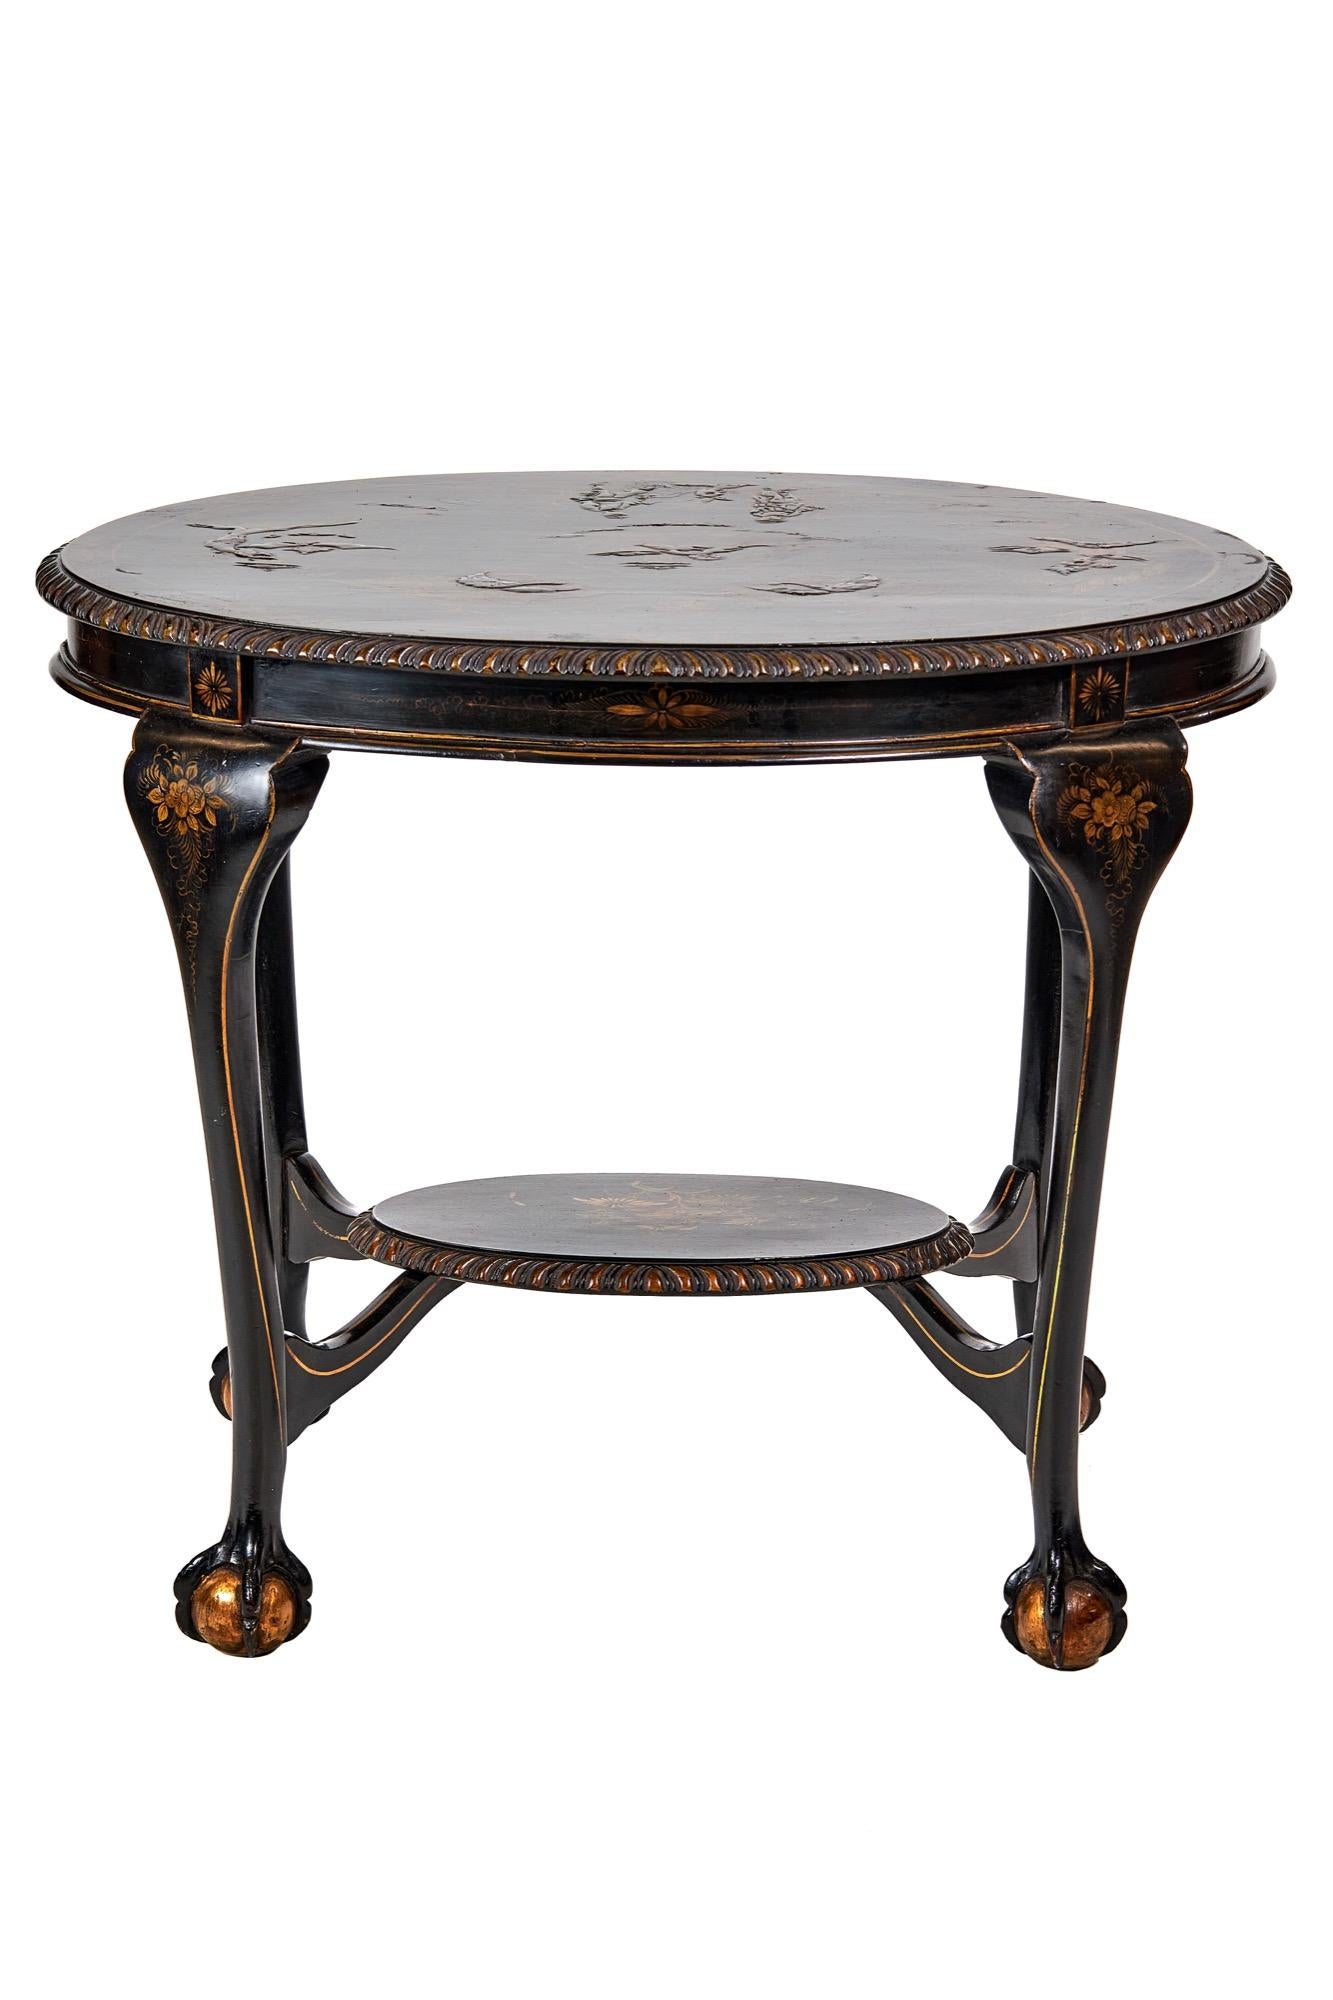 Chinoiserie chinoiserie Decorated Oval 2 Tier Table, circa 1900 For Sale